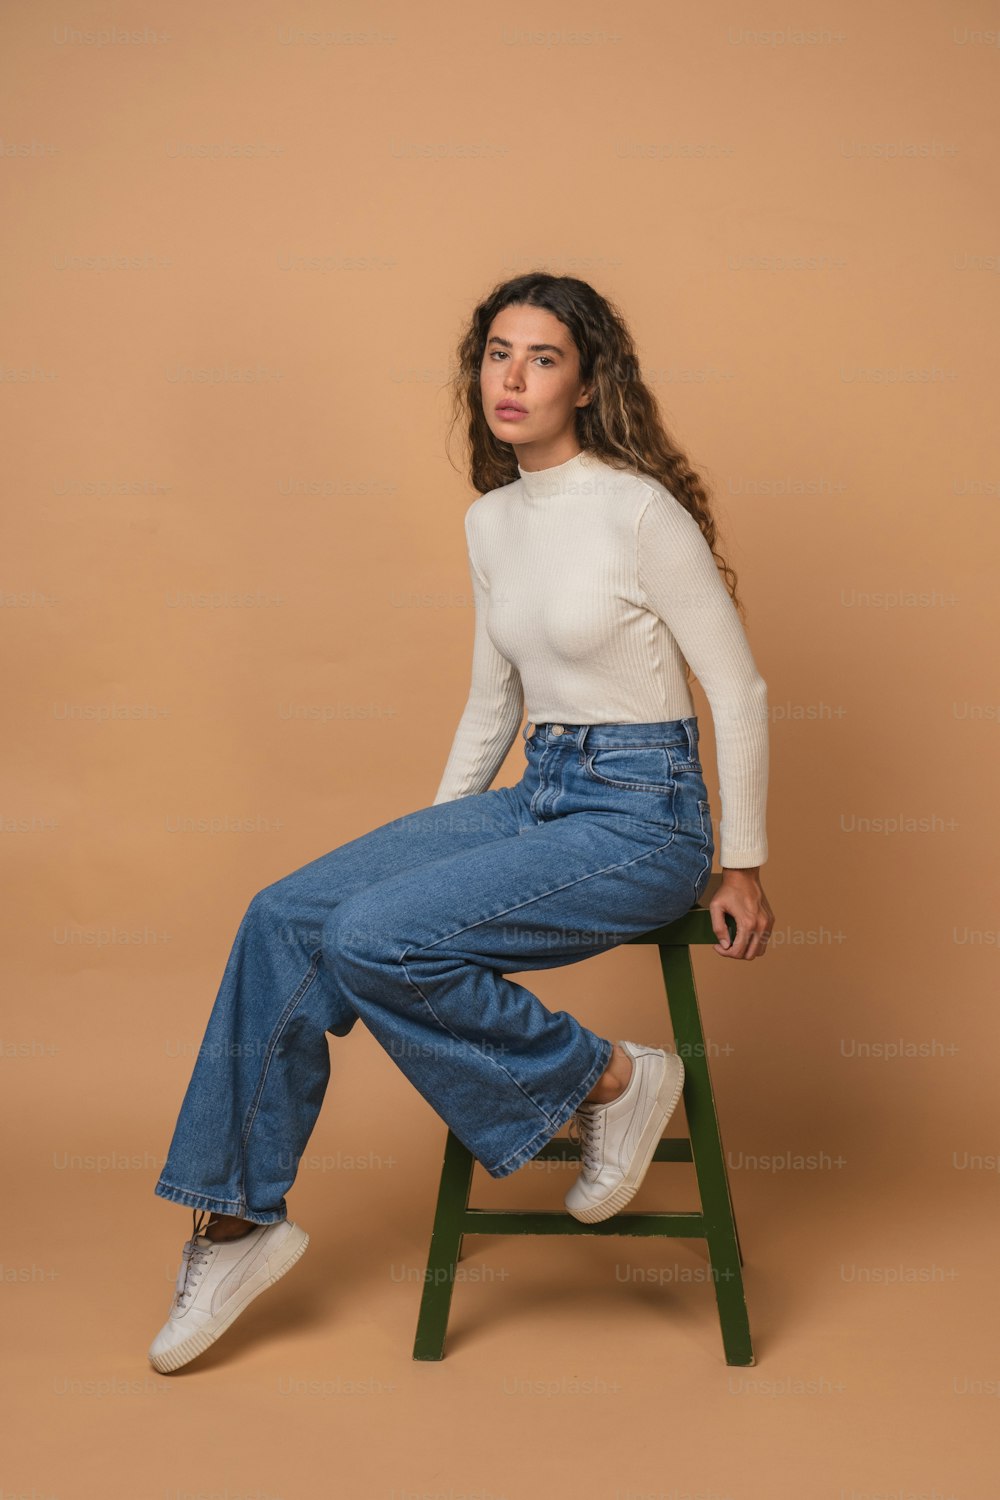 a woman sitting on a stool wearing a white top and jeans